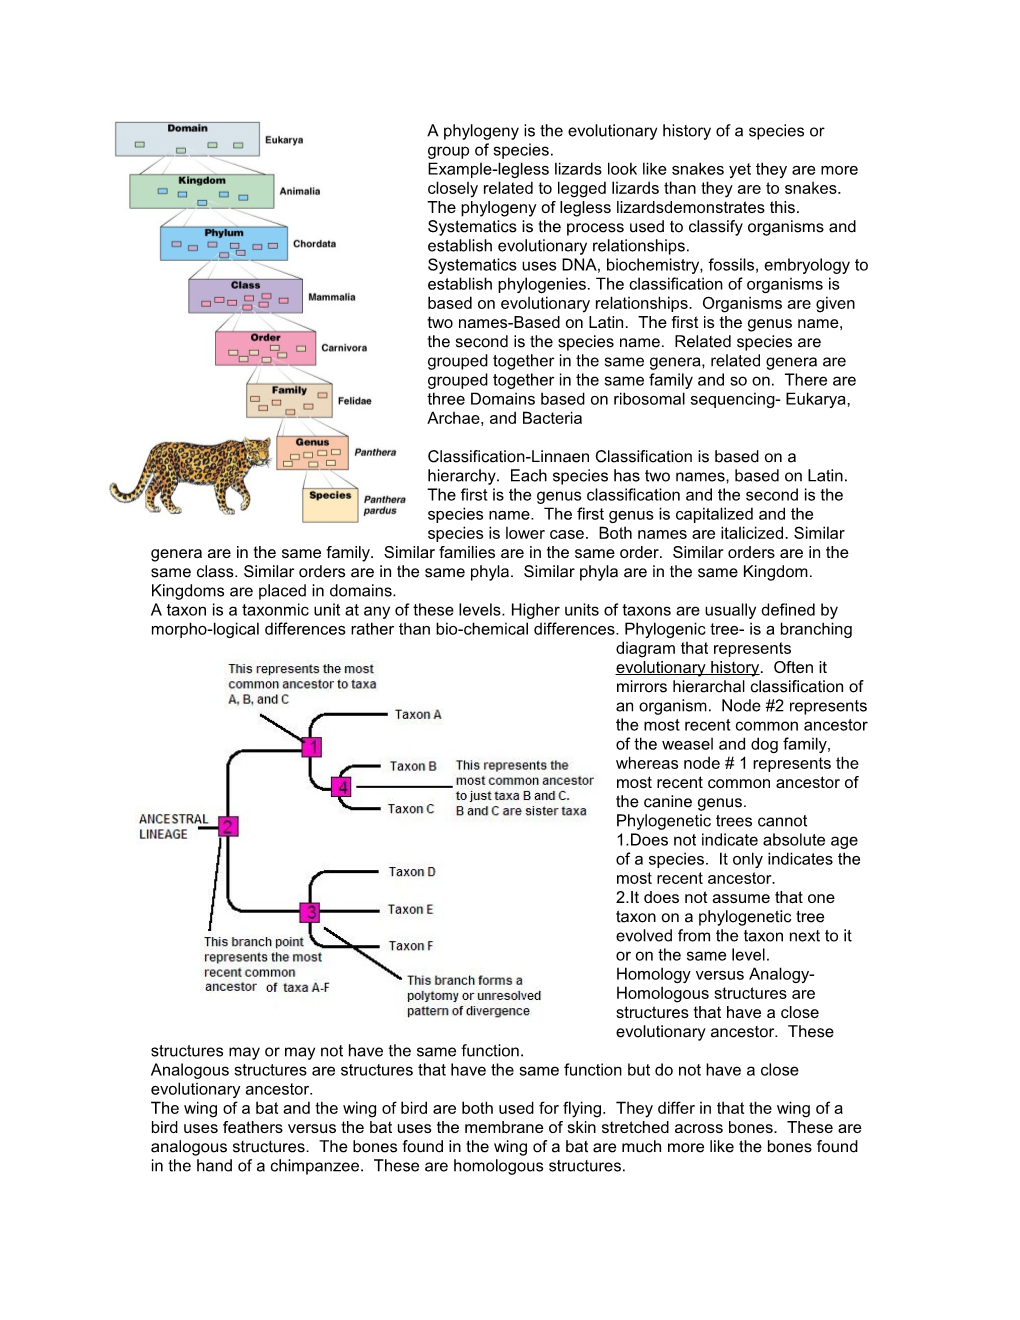 A Phylogeny Is the Evolutionary History of a Species Or Group of Species